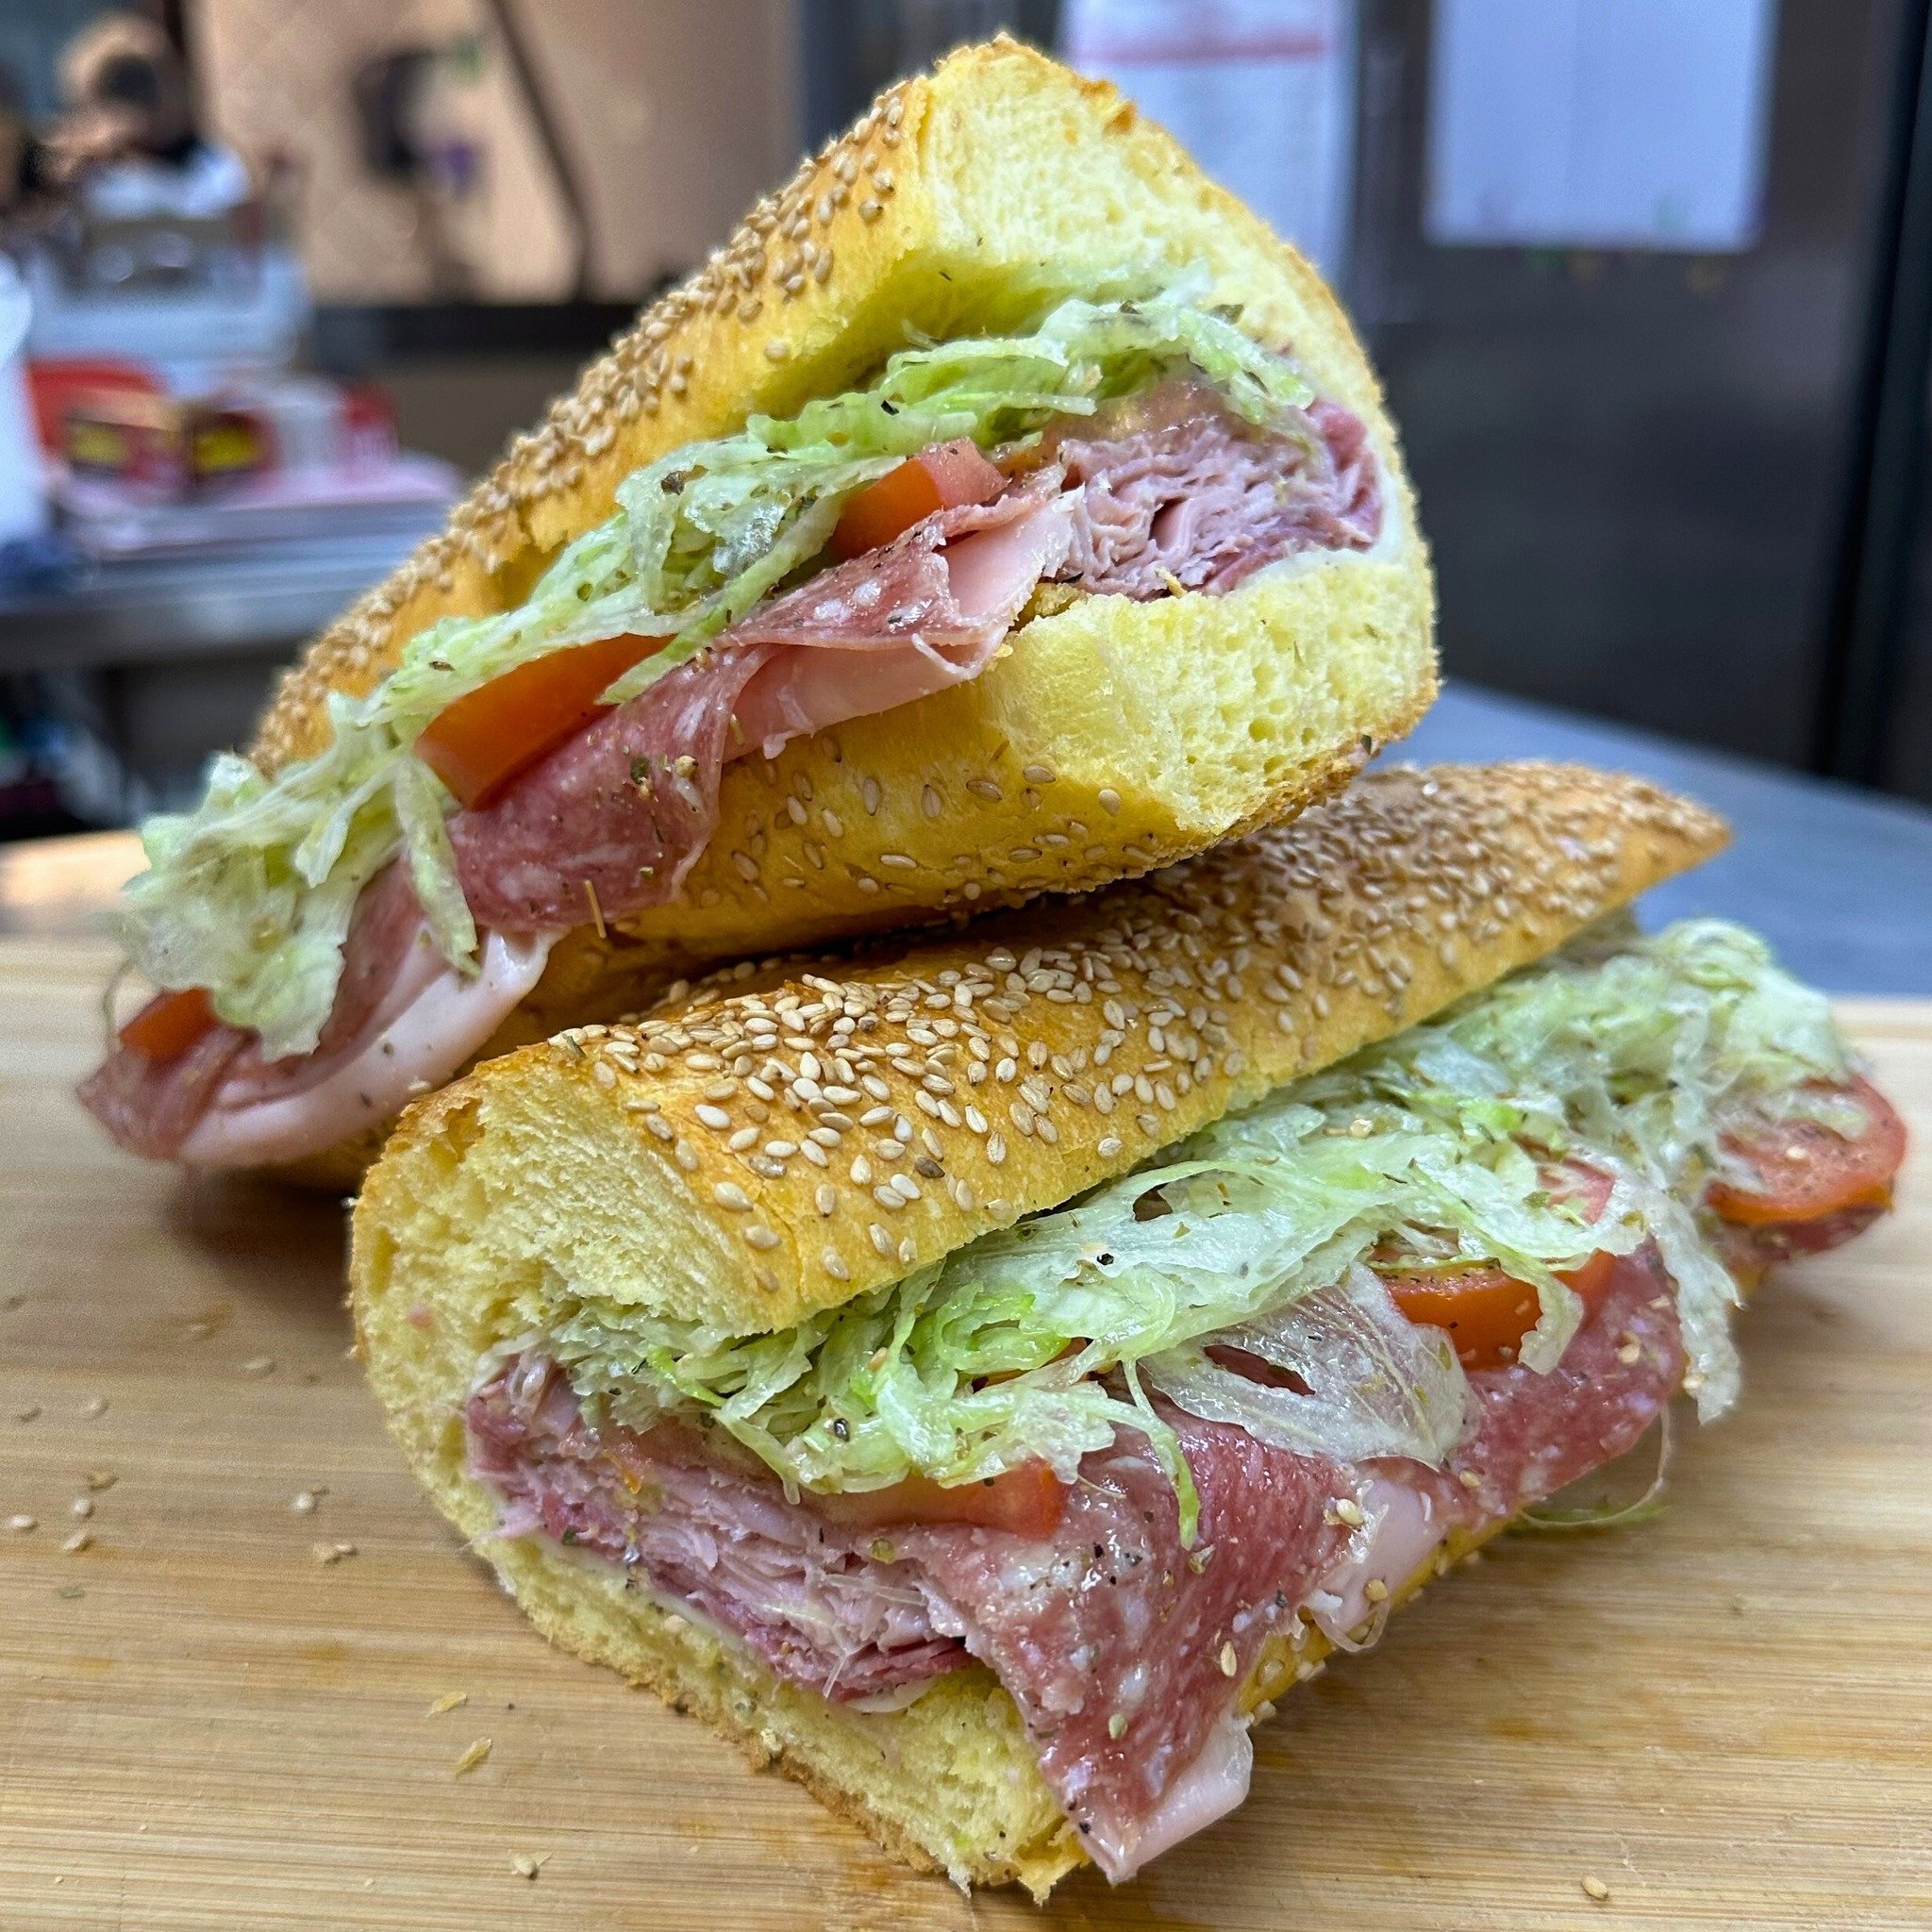 🚨Sandwich of the Week 🚨

Available Saturday, April 13th ONLY!
✨ Carnivoro Sandwich✨

An artisanal semolina baguette with thinly sliced mortadella, prosciutto cotto, capicola, salami, fresh tomatoes, iceberg lettuce, olive oil, red wine vinegar, sal